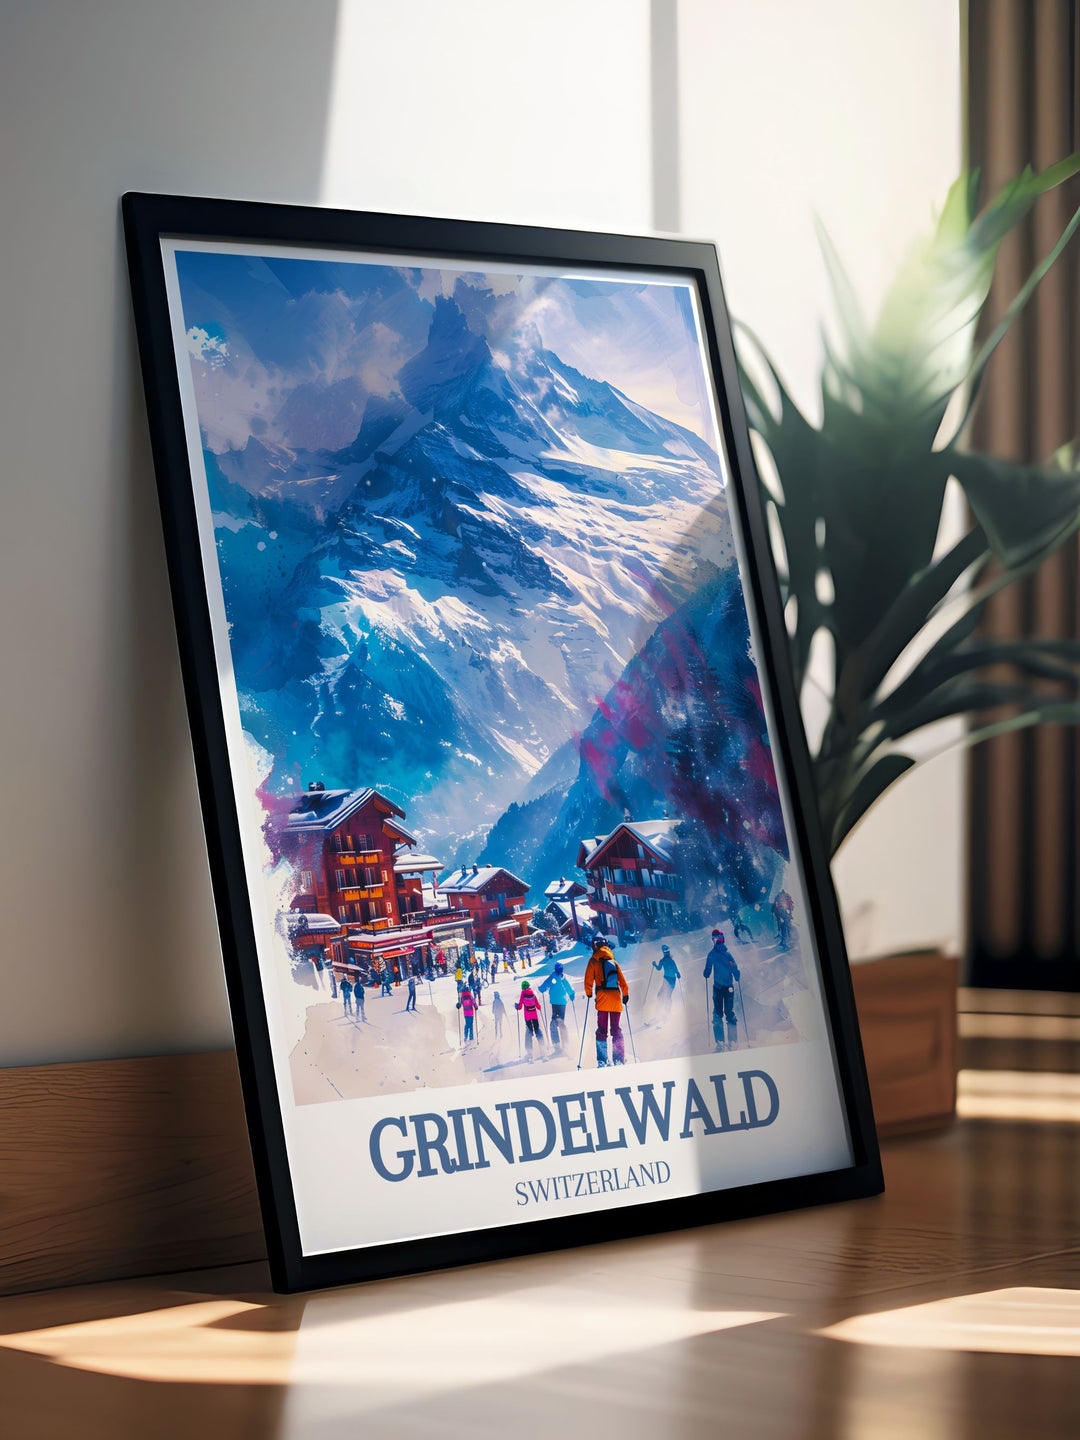 This art print of the Swiss Alps features the majestic peaks and tranquil beauty of Grindelwald, offering a detailed and picturesque view of one of Europes most beloved regions.